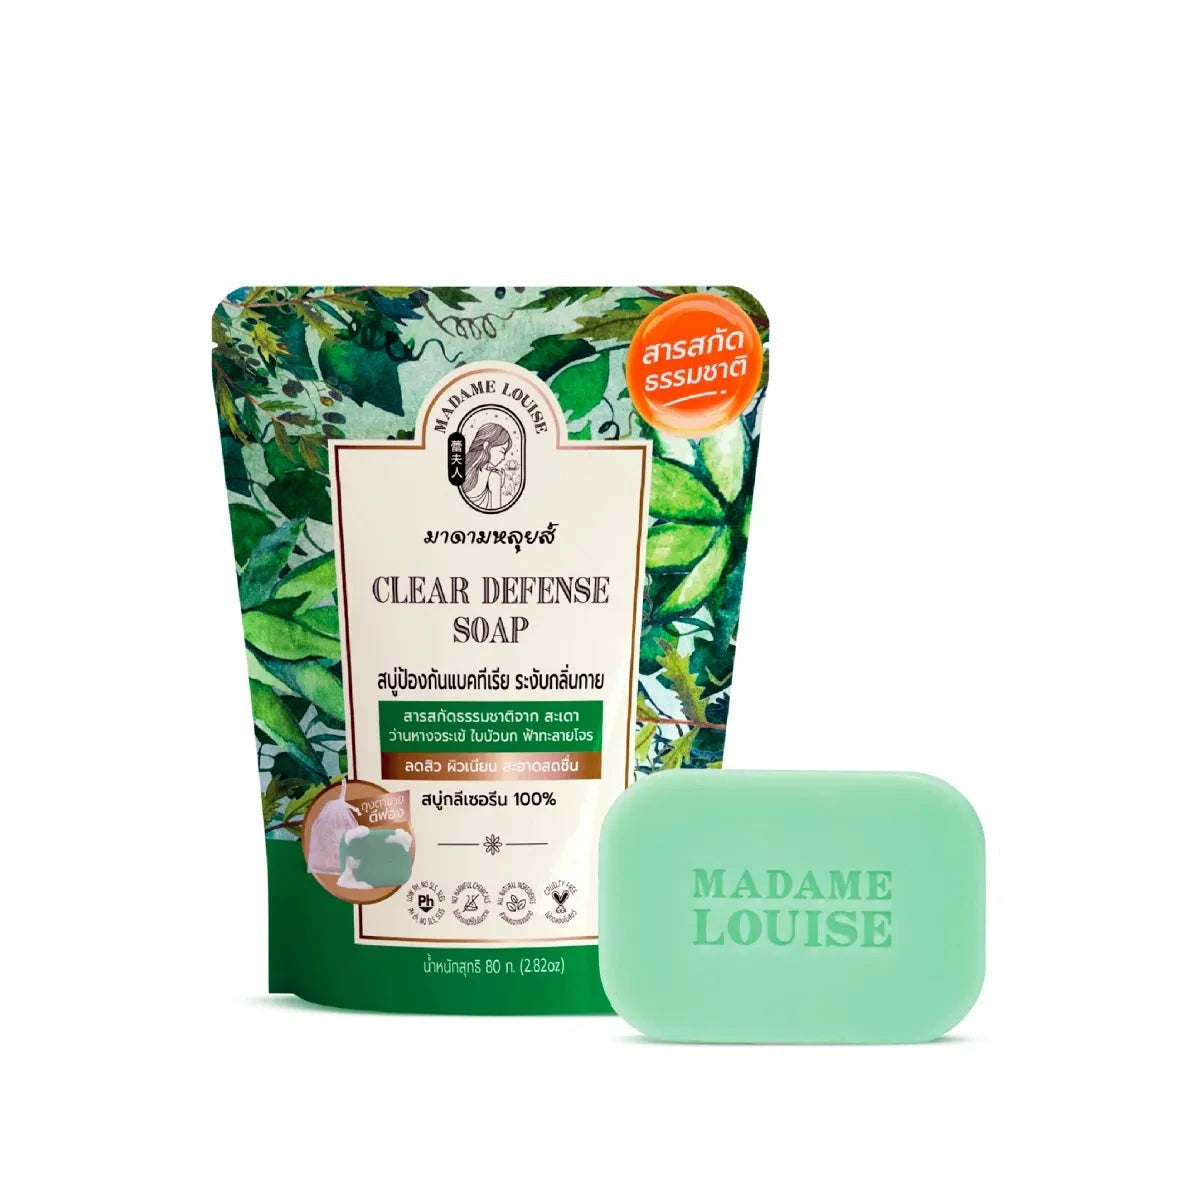 Madame Louise Clear Defense Soap Pack of 4